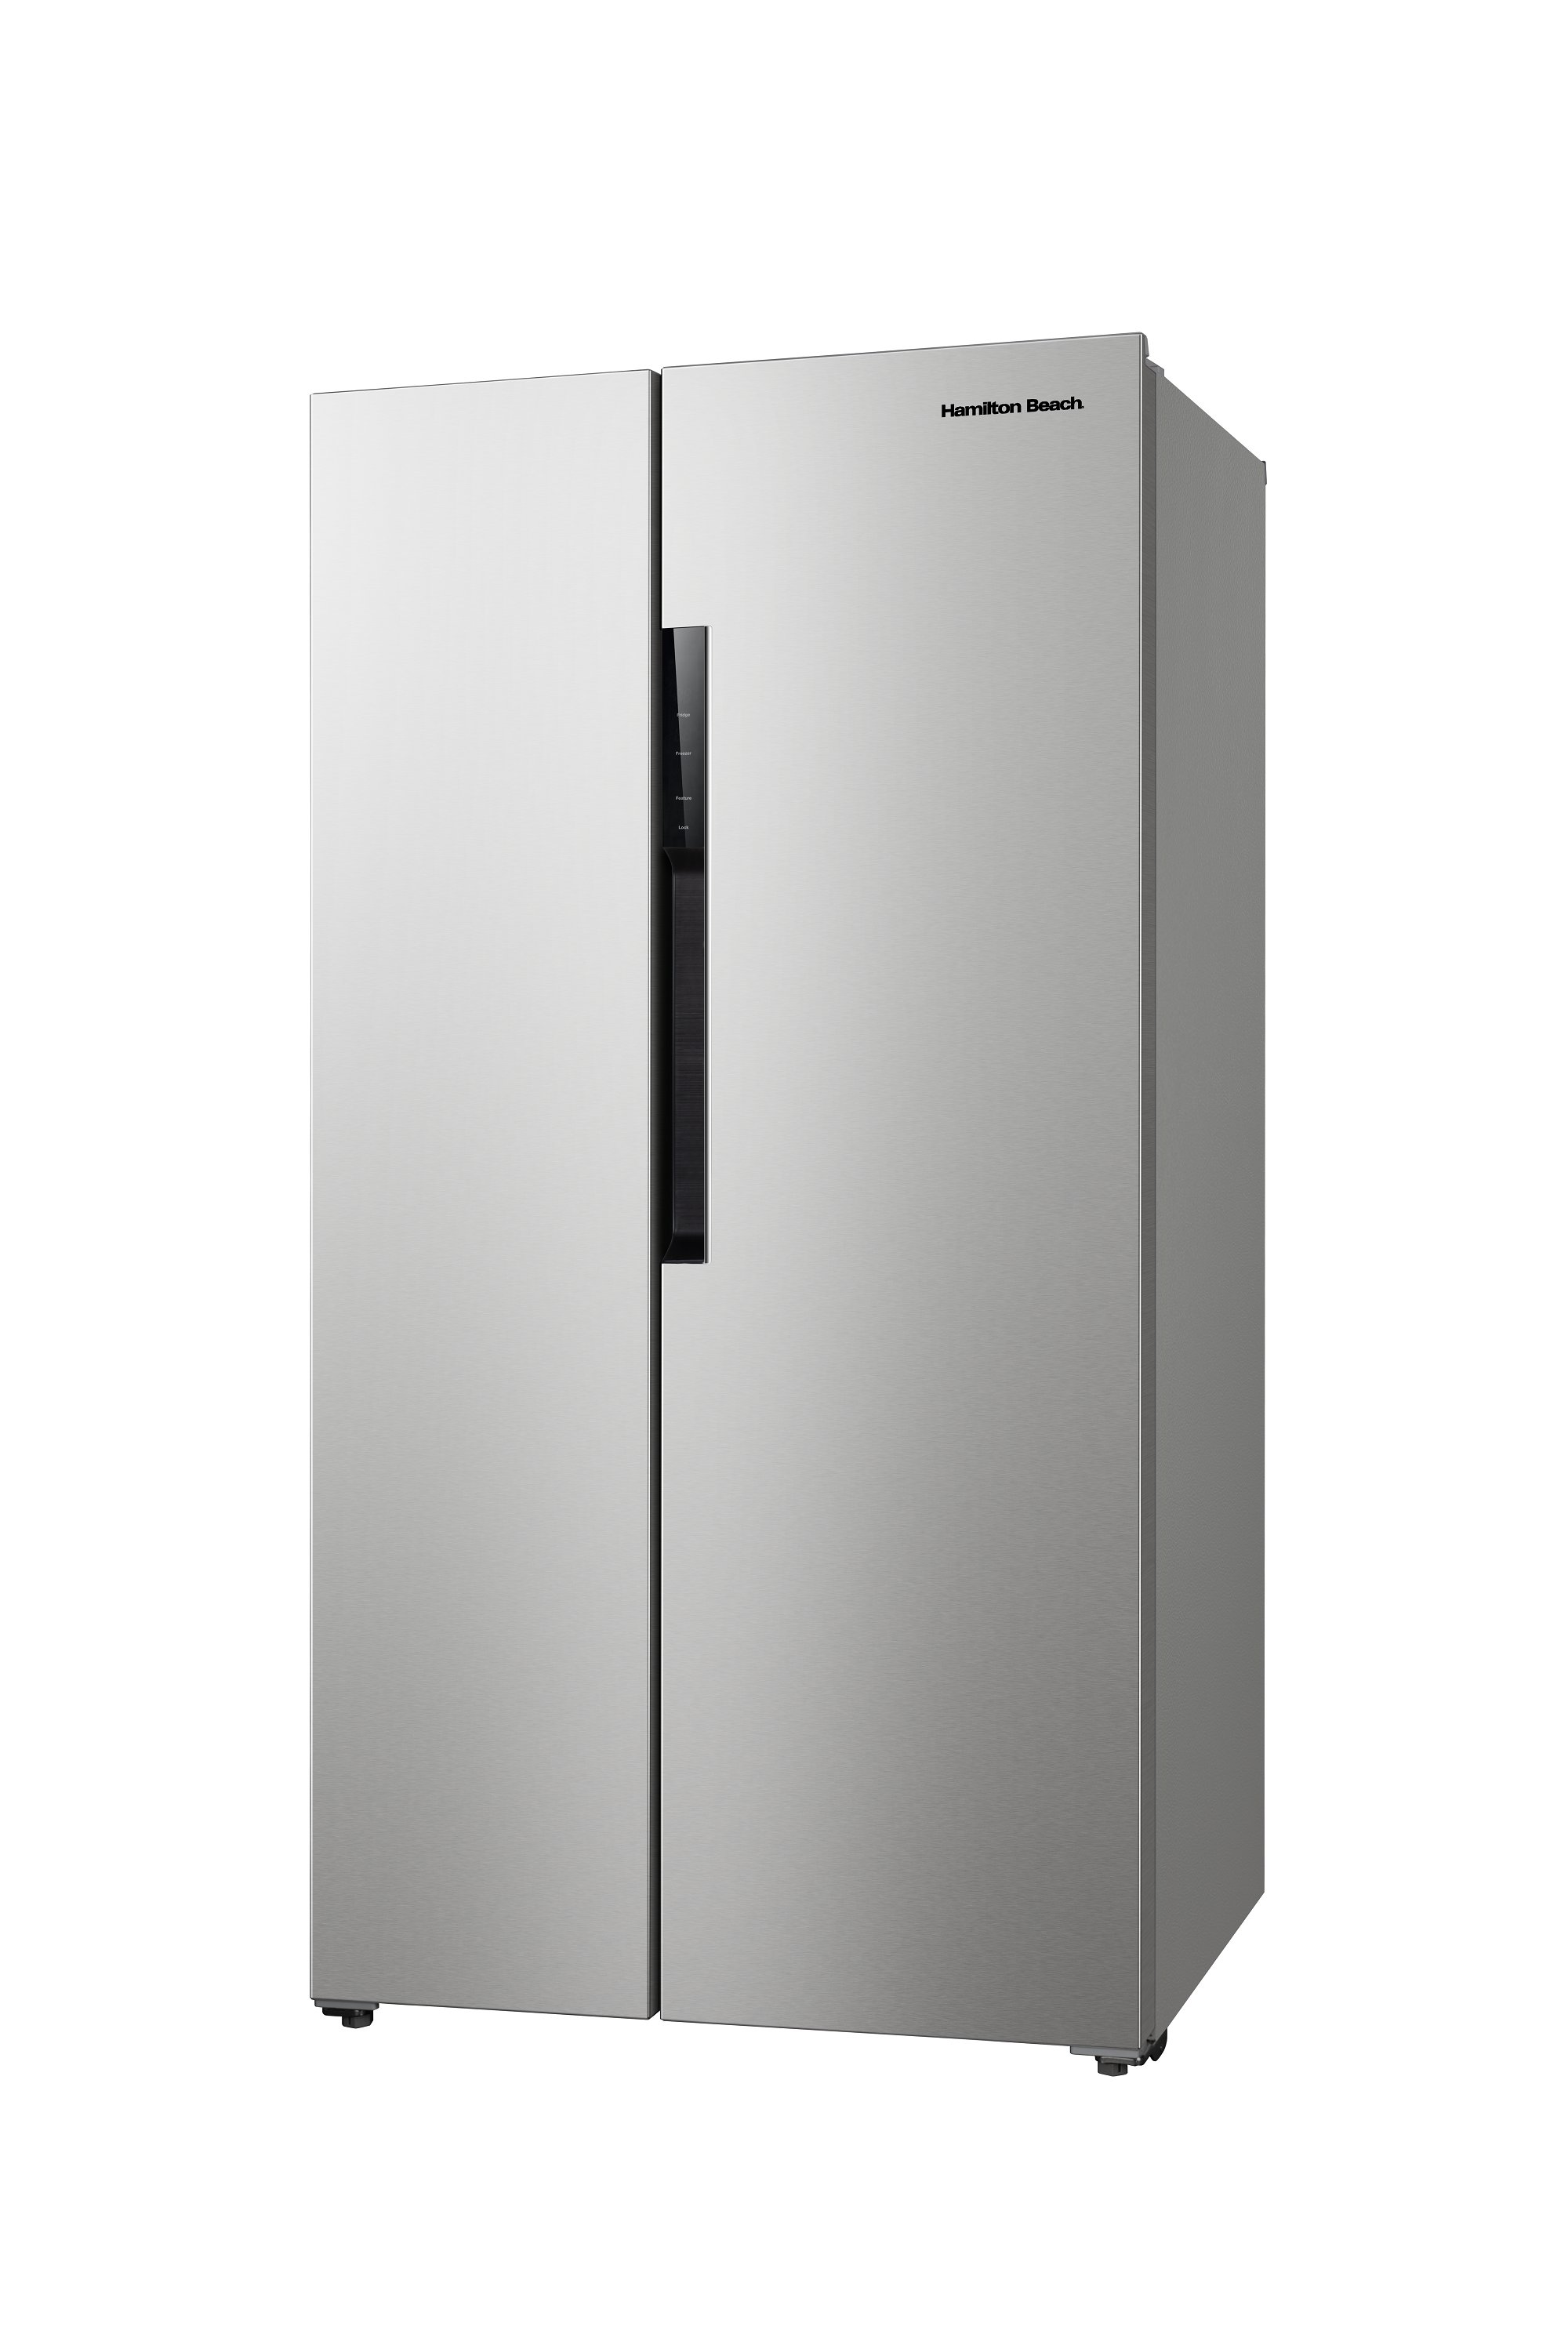 Hamilton Beach 15.6 cu. Ft. Side by side Stainless Refrigerator, Freestanding Installation, HZ8551 - image 3 of 6